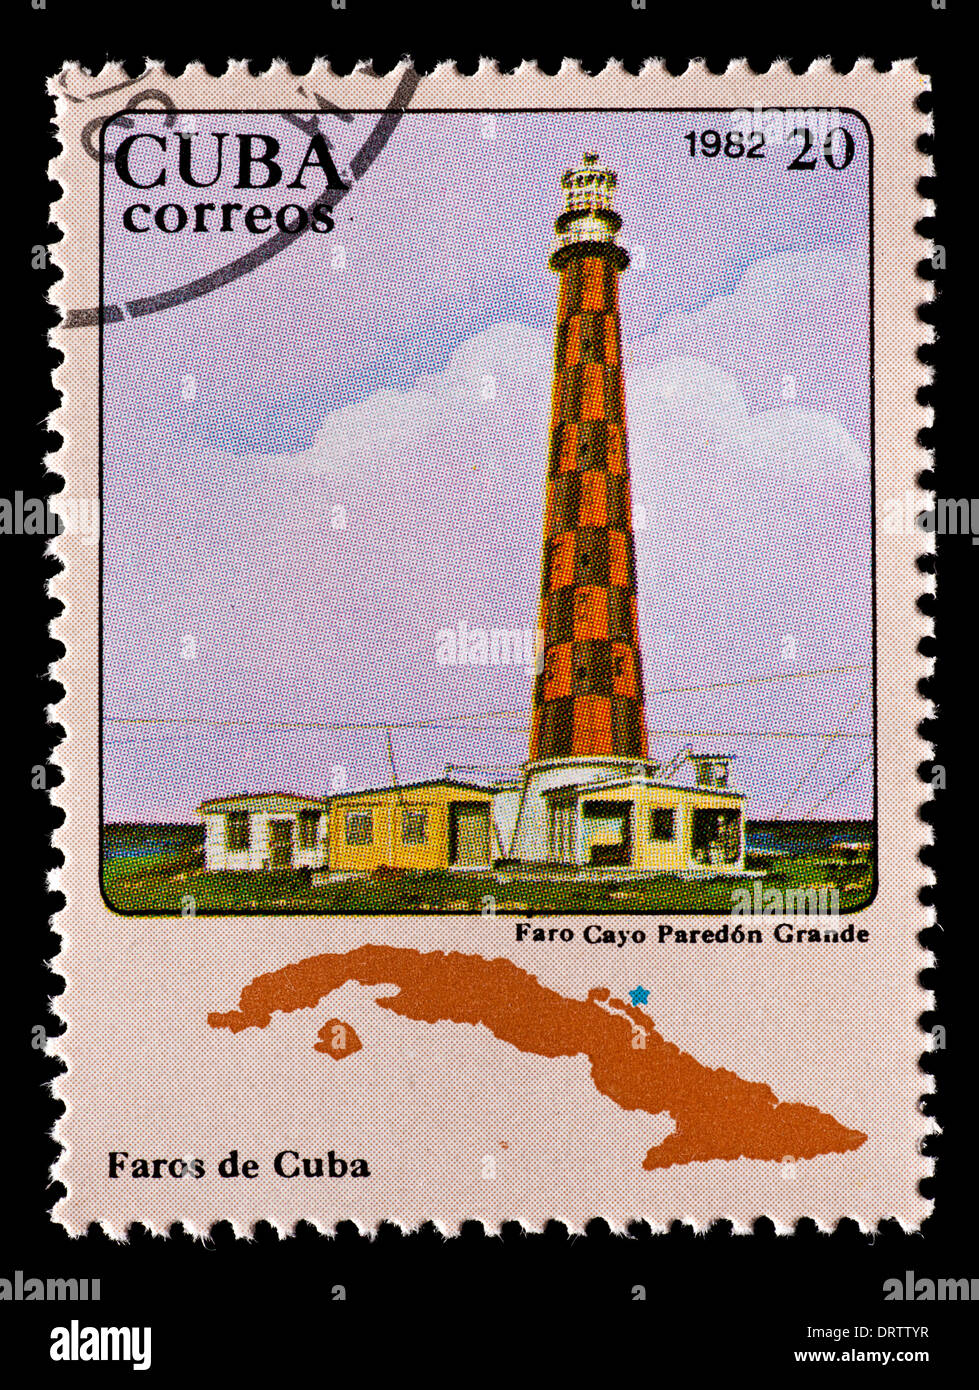 Postage stamp from Cuba depicting Paredon Grande Caye lighthouse. Stock Photo